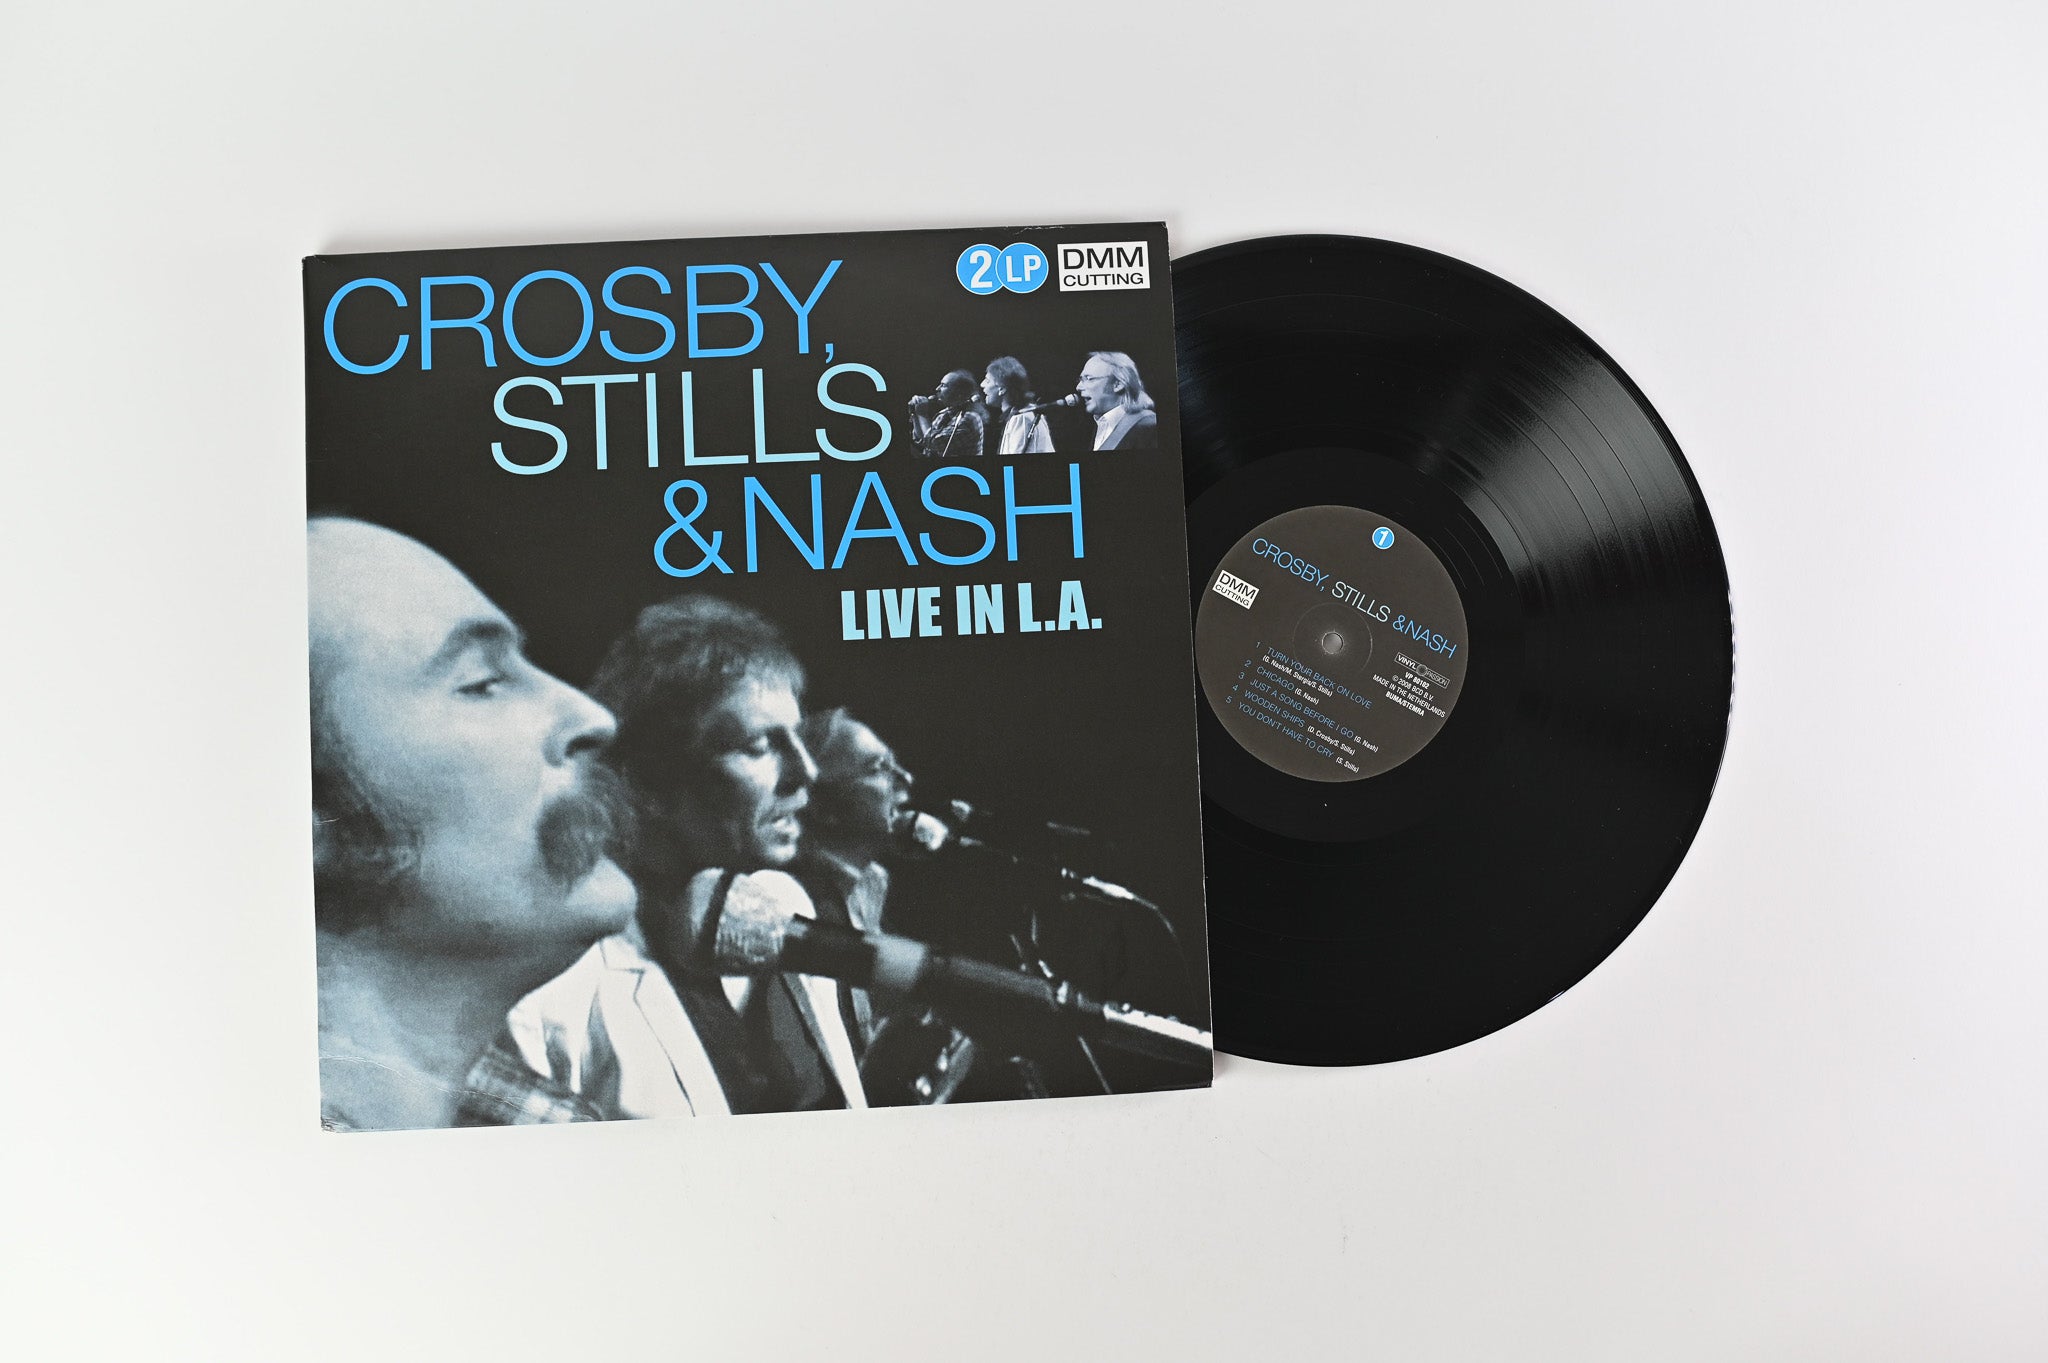 Crosby, Stills & Nash - Live In L.A. Unofficial Release on Vinyl Passion